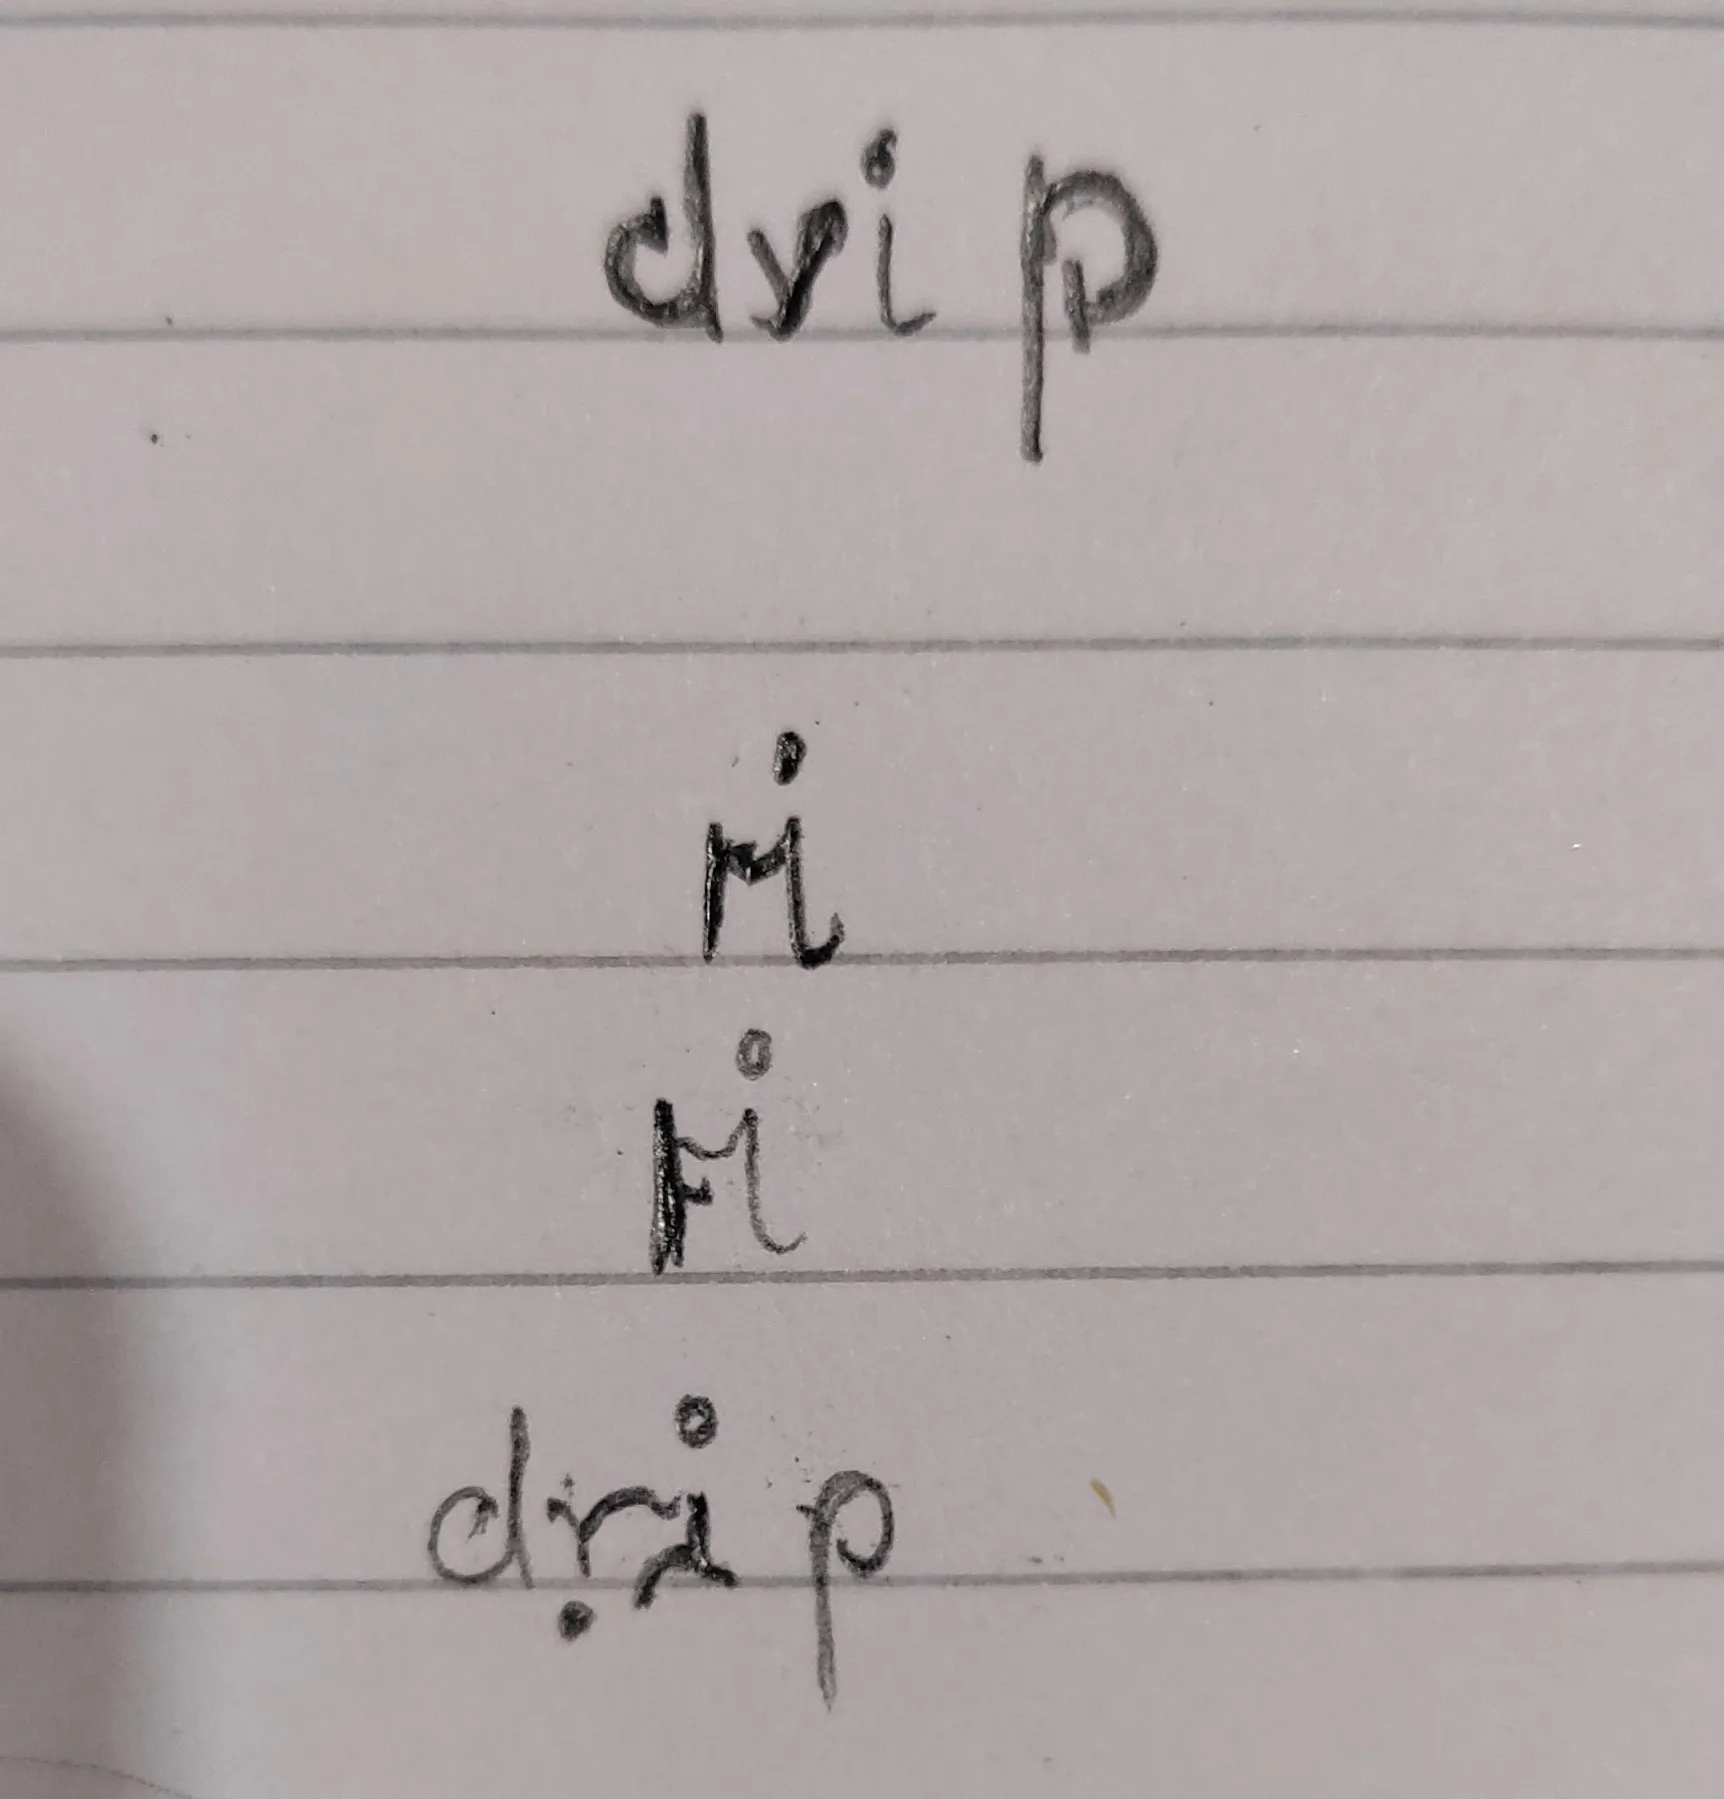 Small written letterforms for the word 'drip' with accents that would allow the symbol to be read the same when flipped vertically.